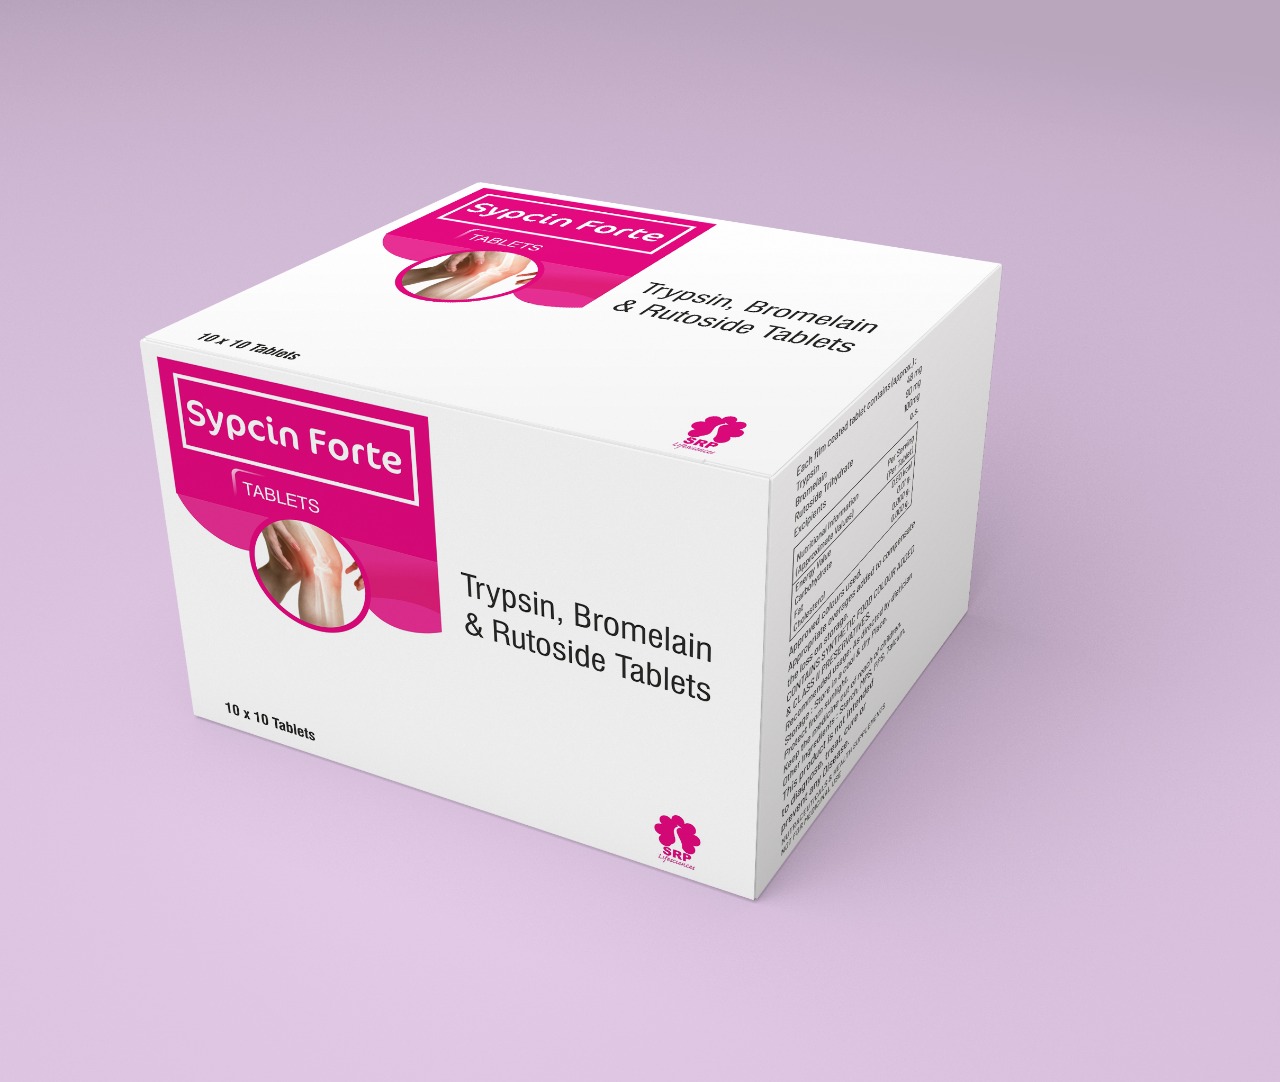 Product Name: Sypcin forte, Compositions of Sypcin forte are tryspin , bromelain and rutoside tablets - Cynak Healthcare